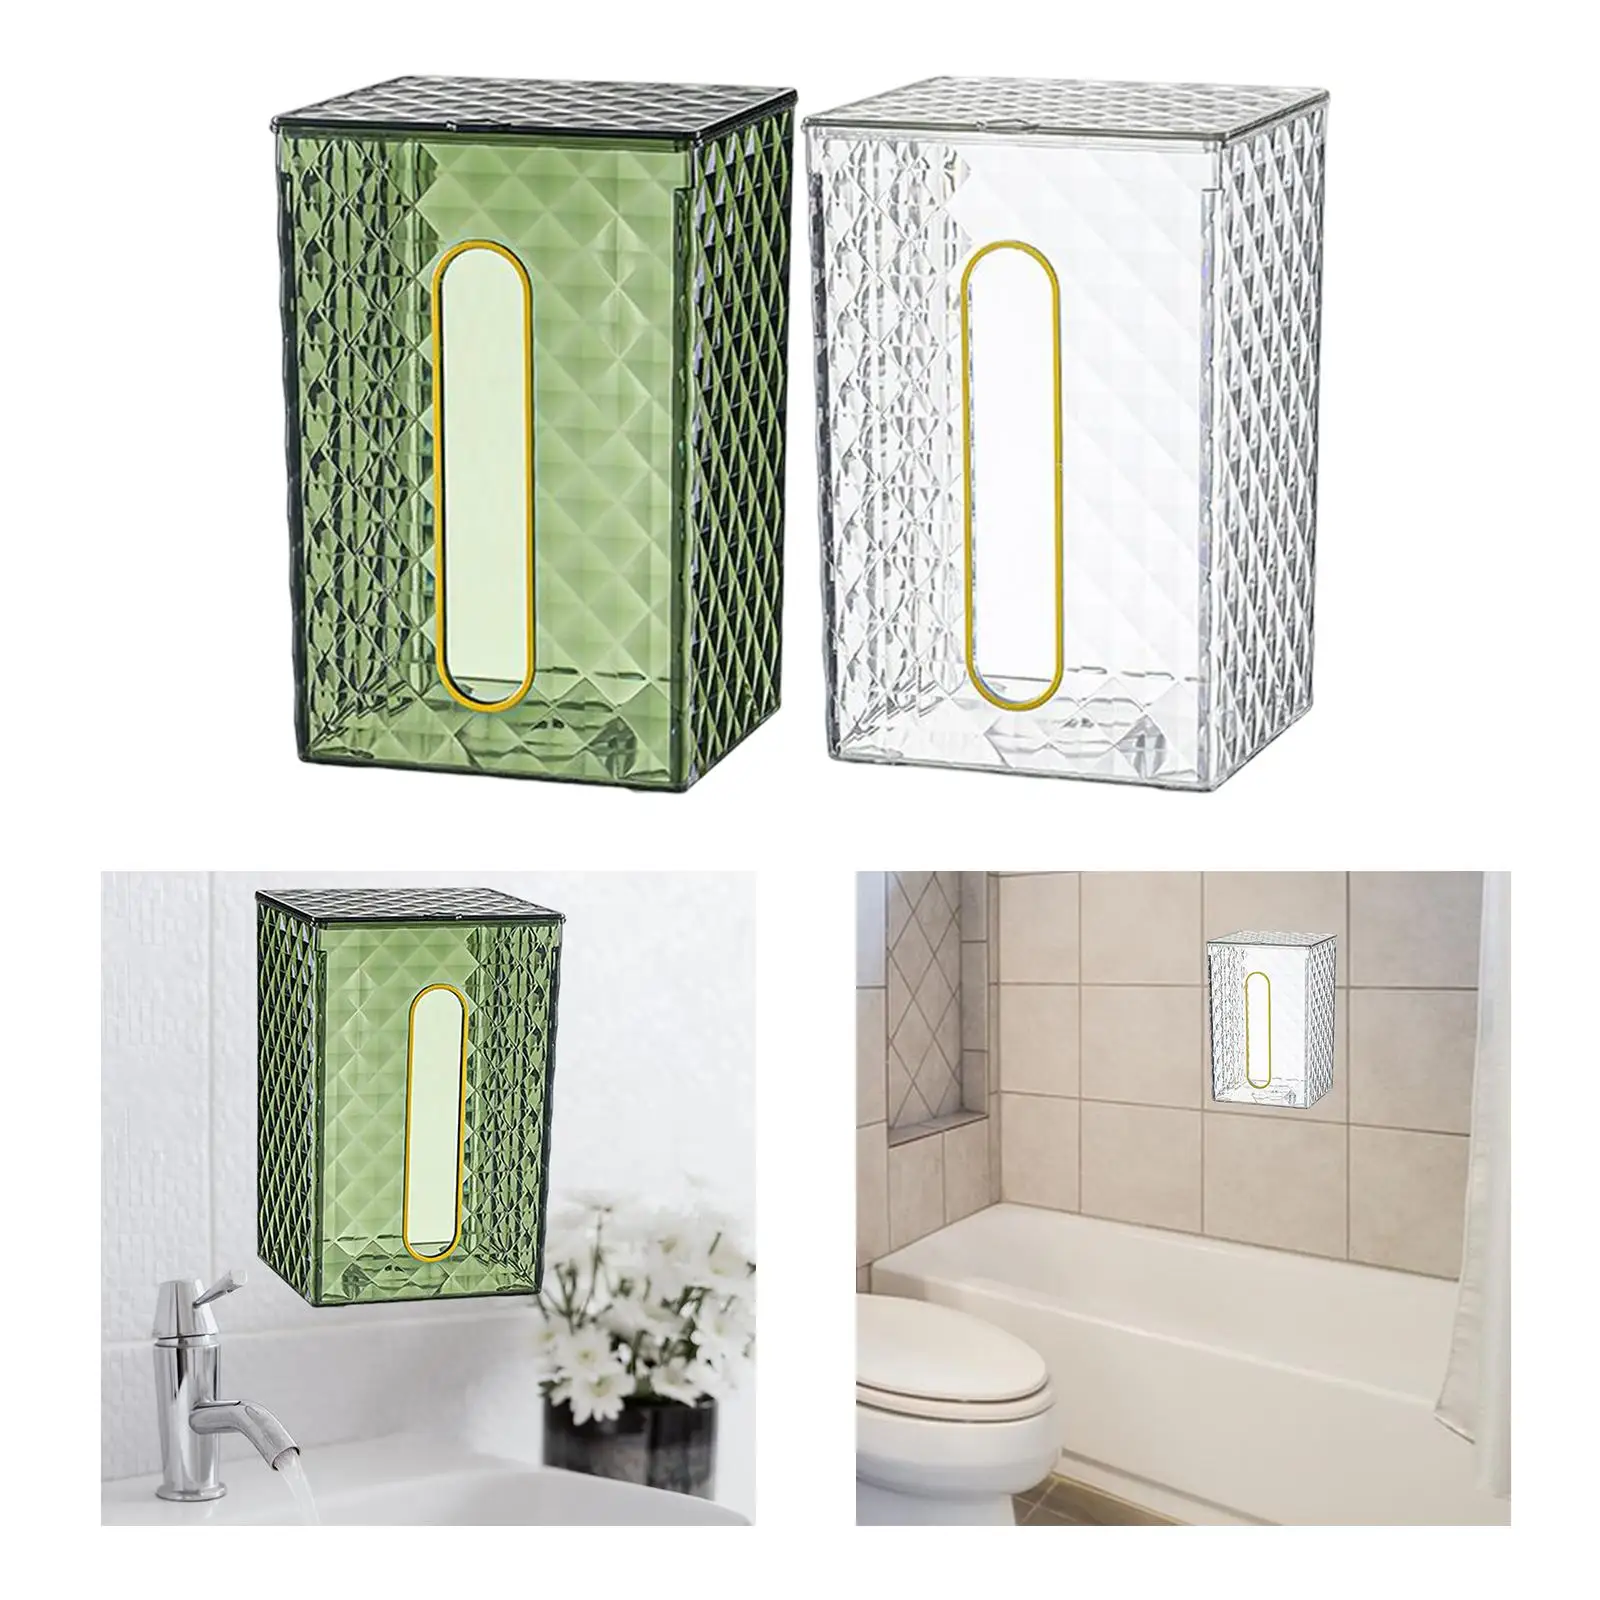 Toilet Paper Tissue Wall Mounted Organizer Strong Bearing Modern Decorate Storage Facial Napkin Box Cover for Home